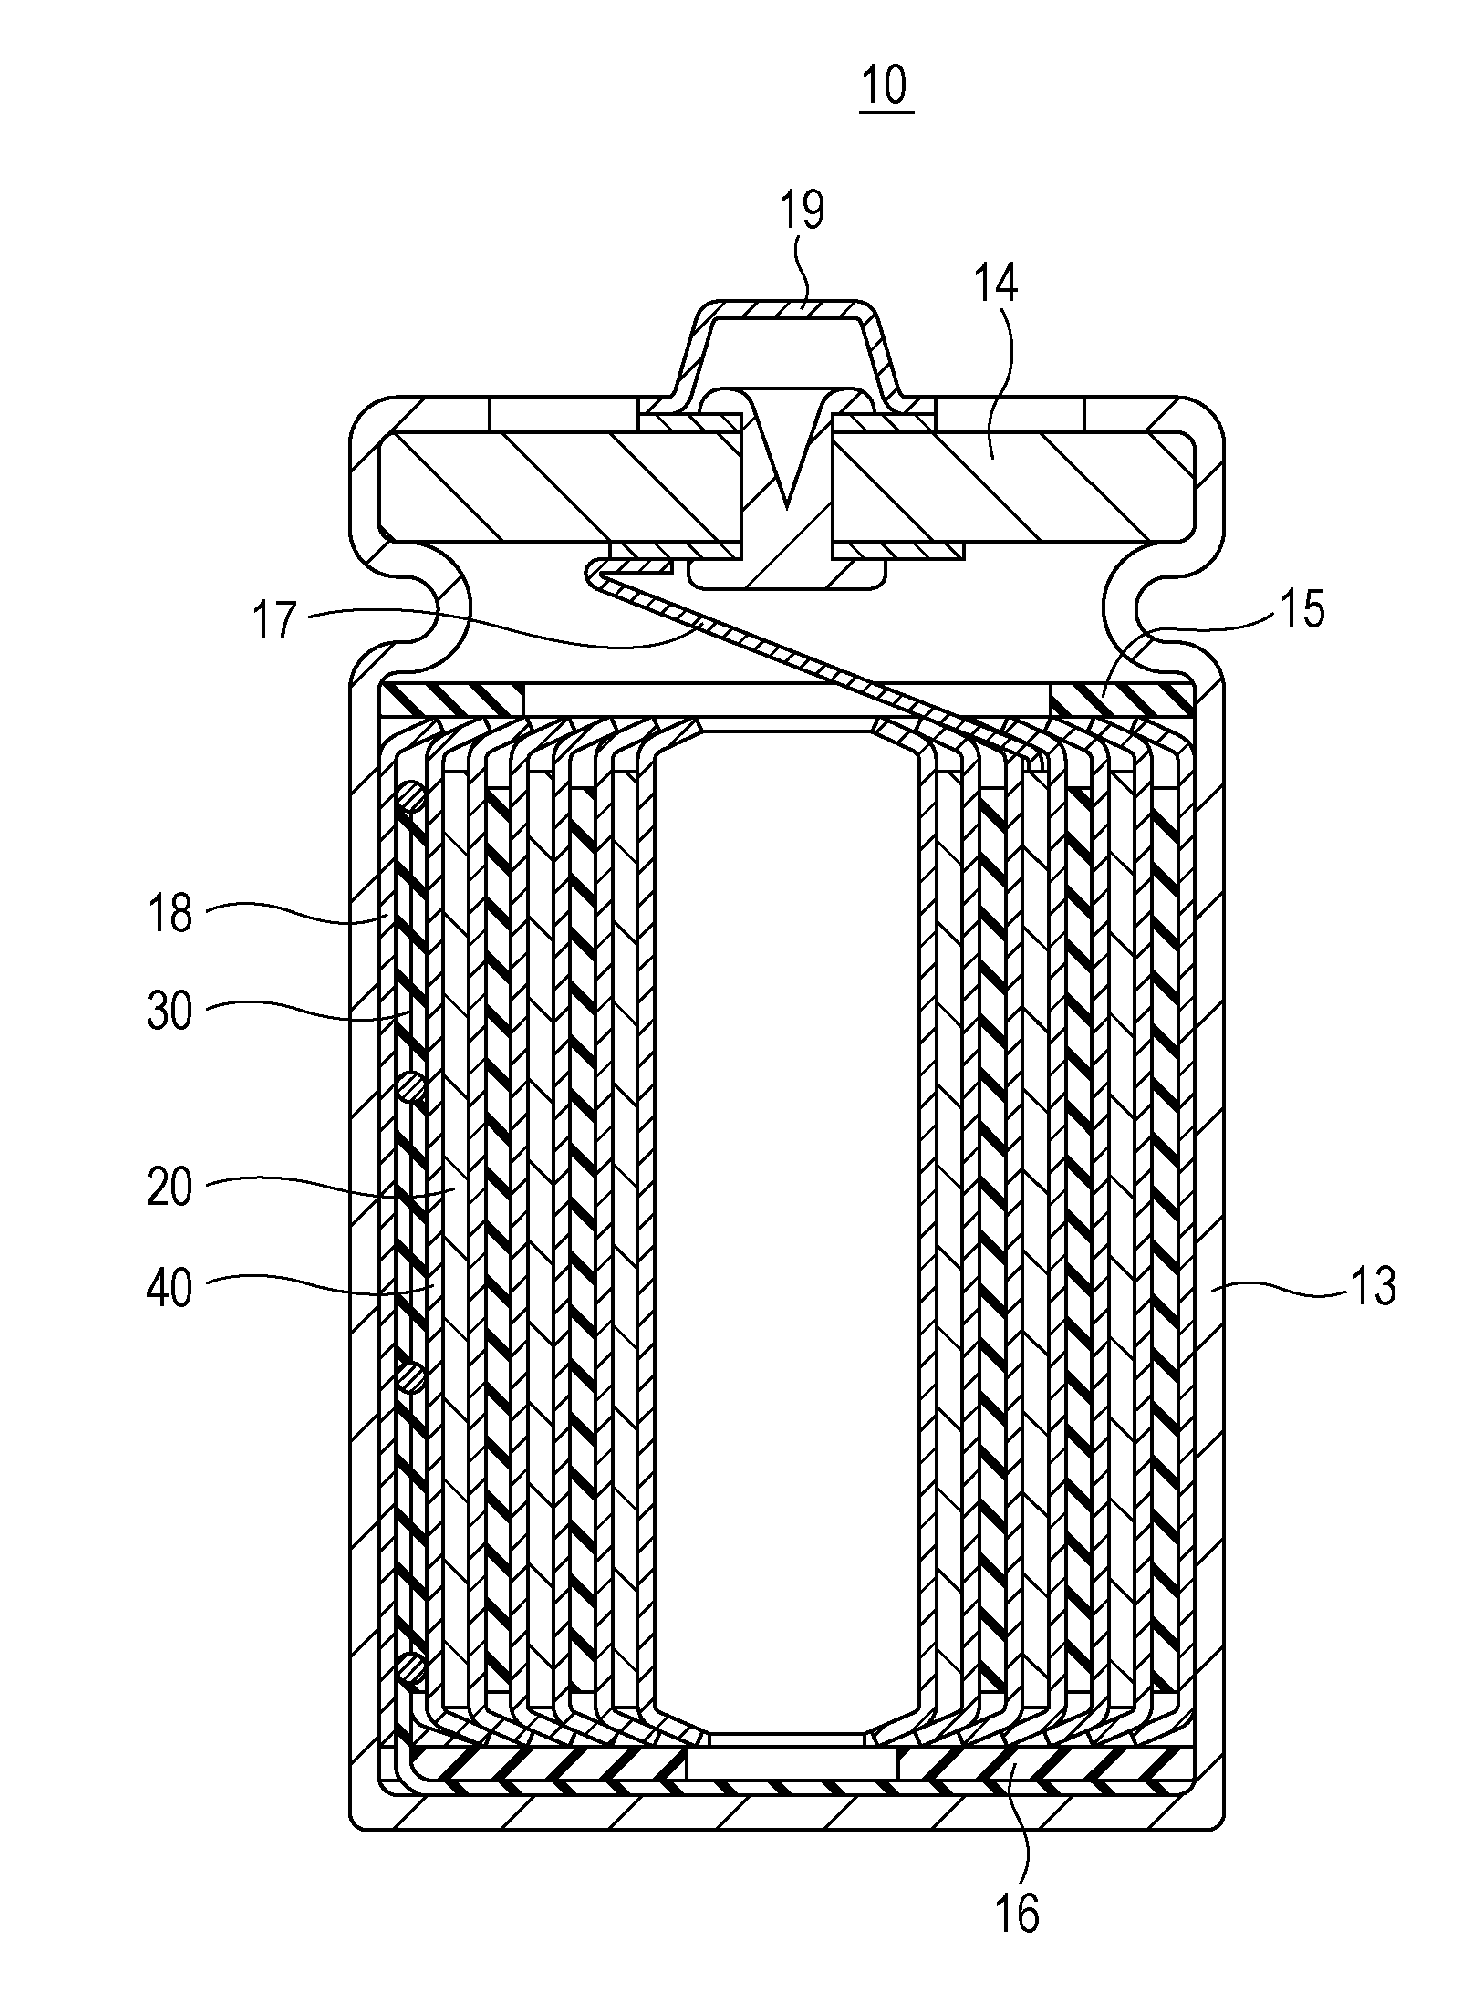 Negative electrode plate for nonaqueous electrolyte secondary battery and method of producing the same